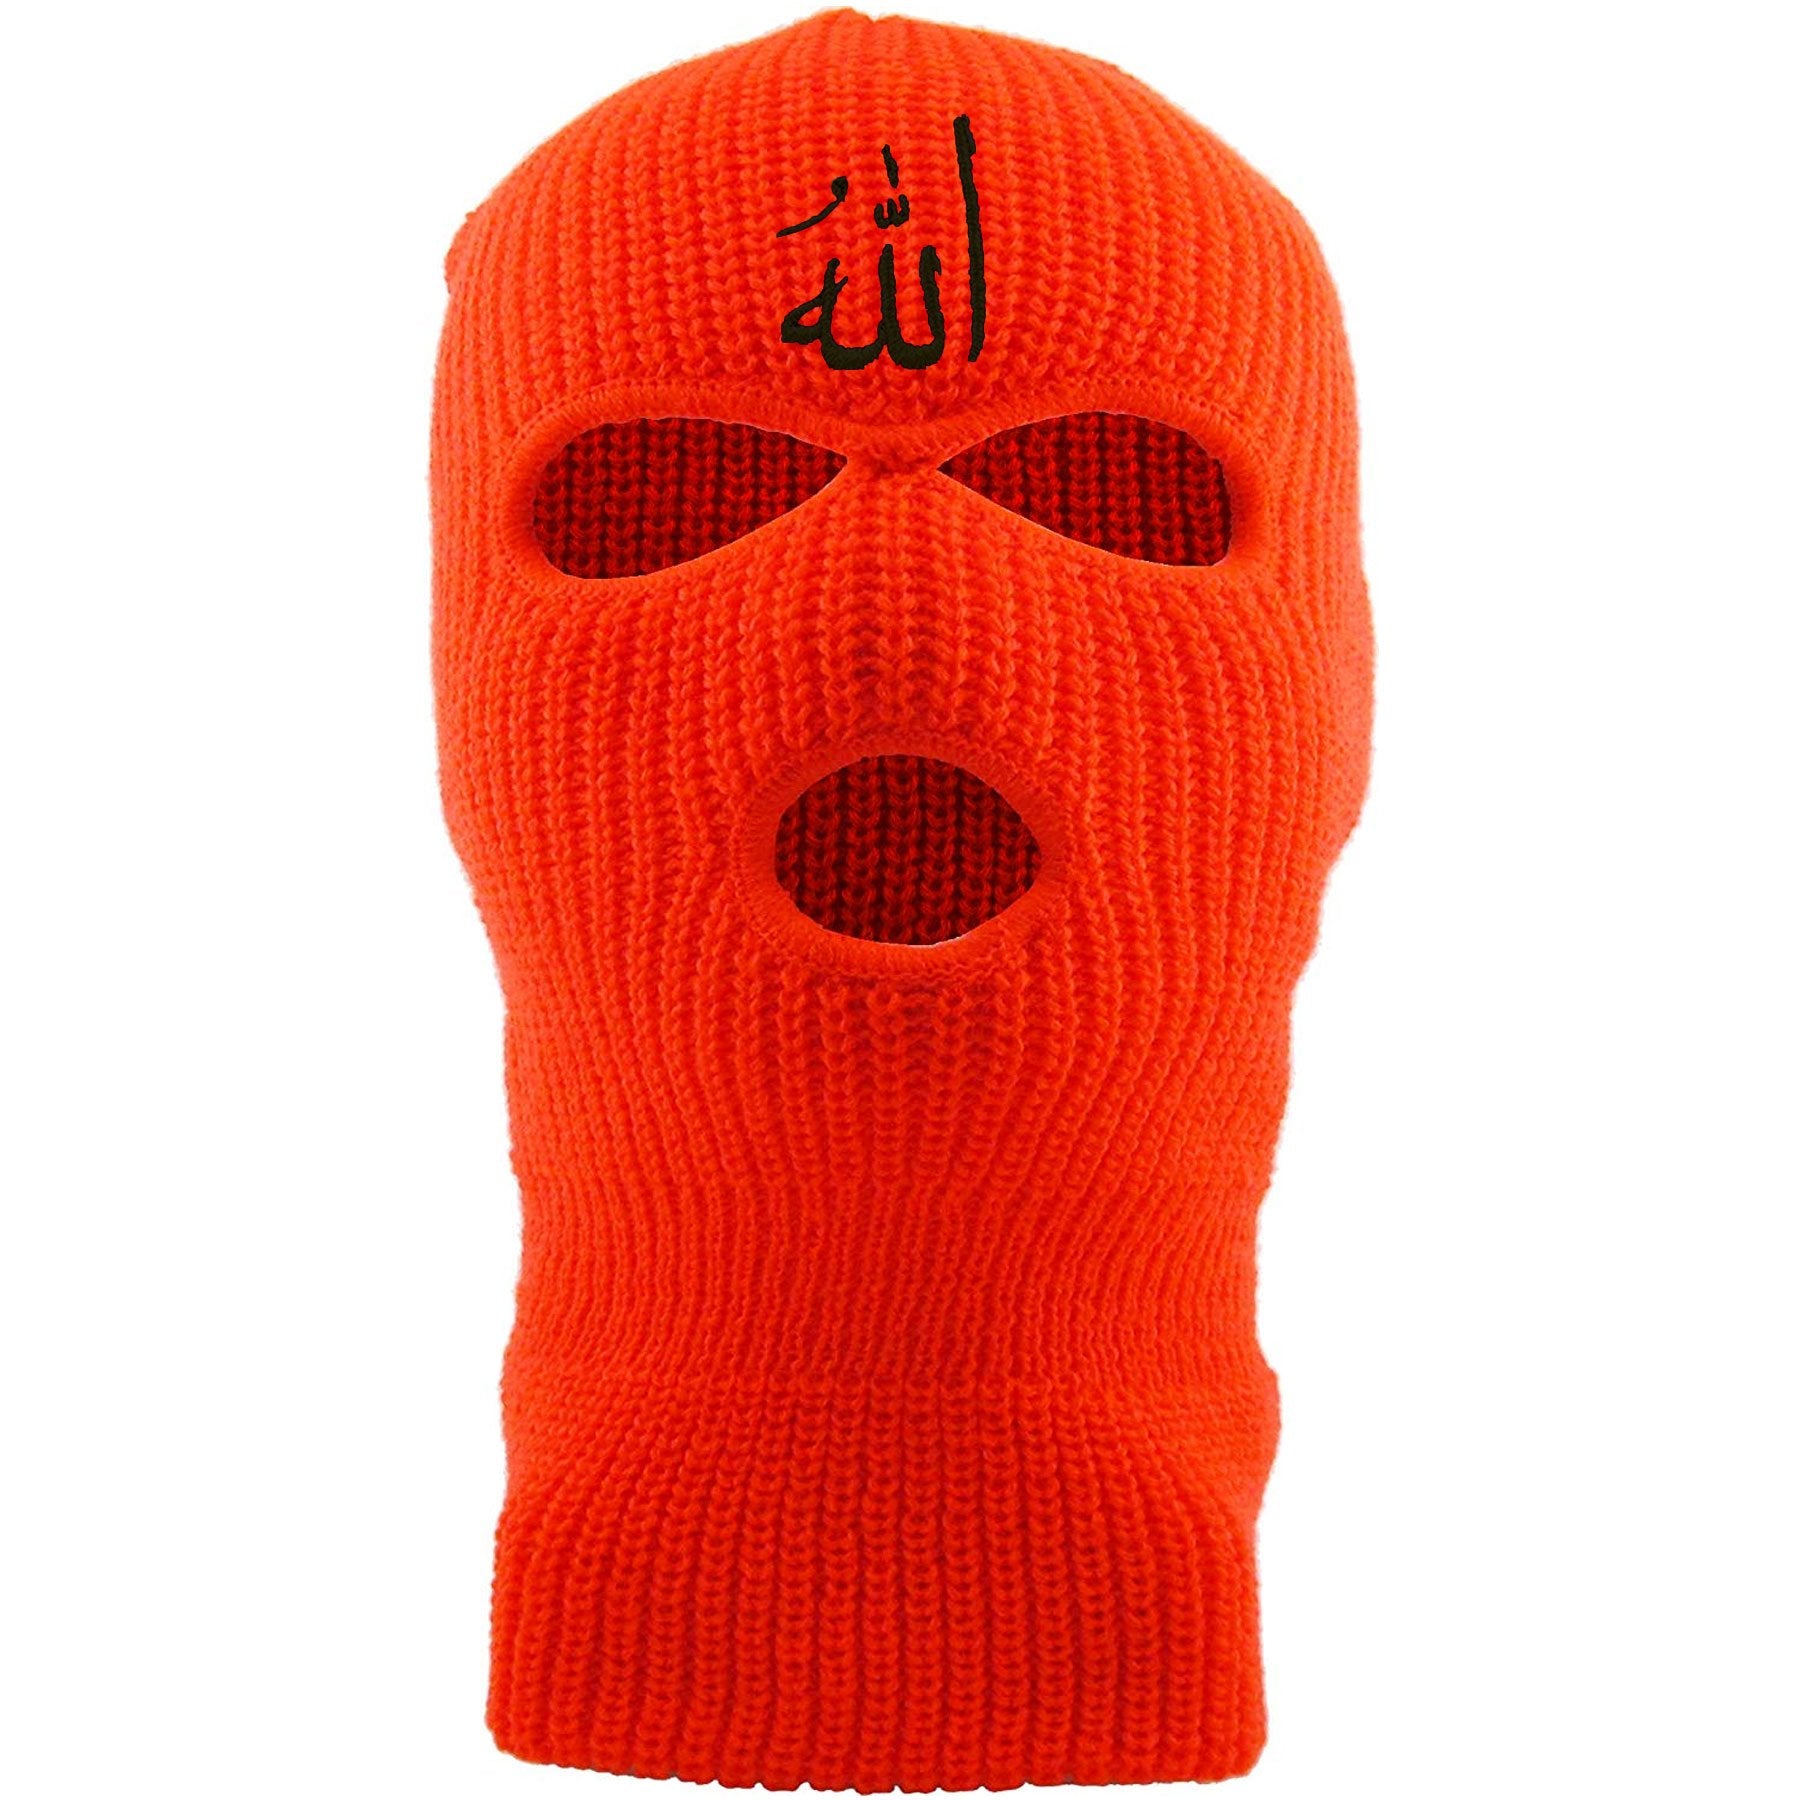 Embroidered on the front of the safety orange Allah ski mask is the arabic writing for the word allah